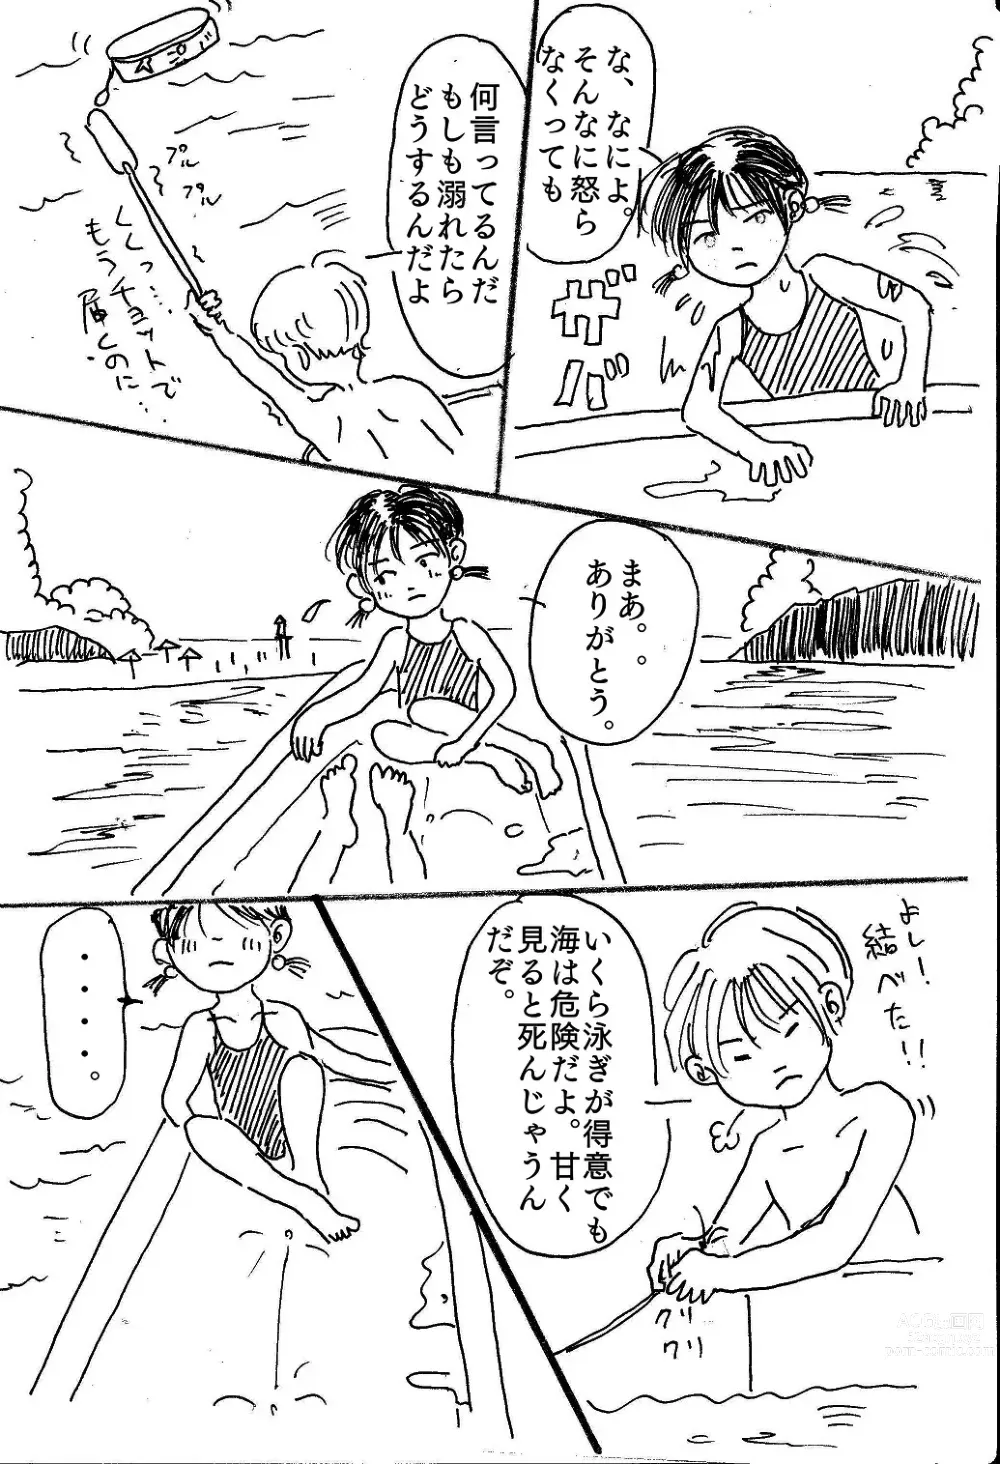 Page 8 of doujinshi 映子と太一